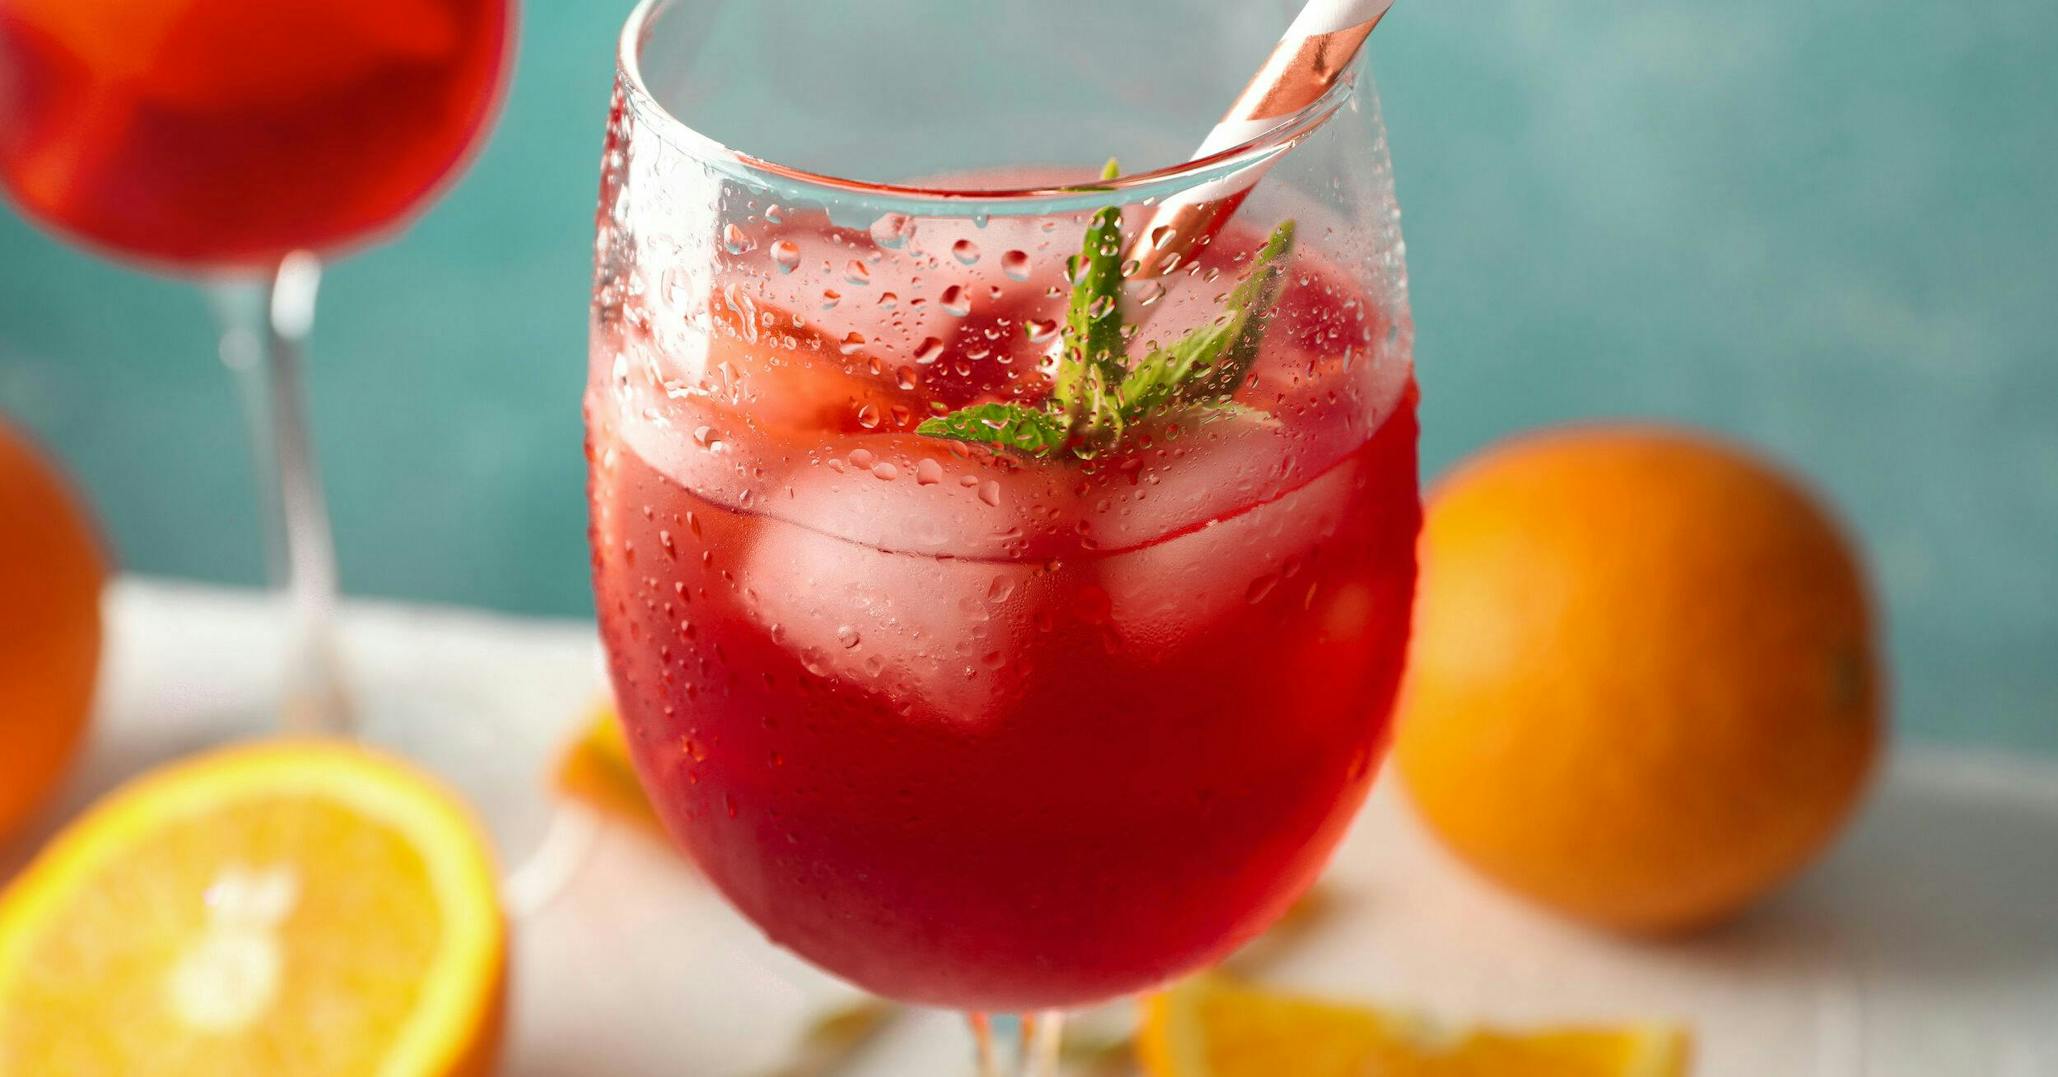 Gin, Grapefruit & Red Wine Punch - a sophisticated drink to take us from winter into spring